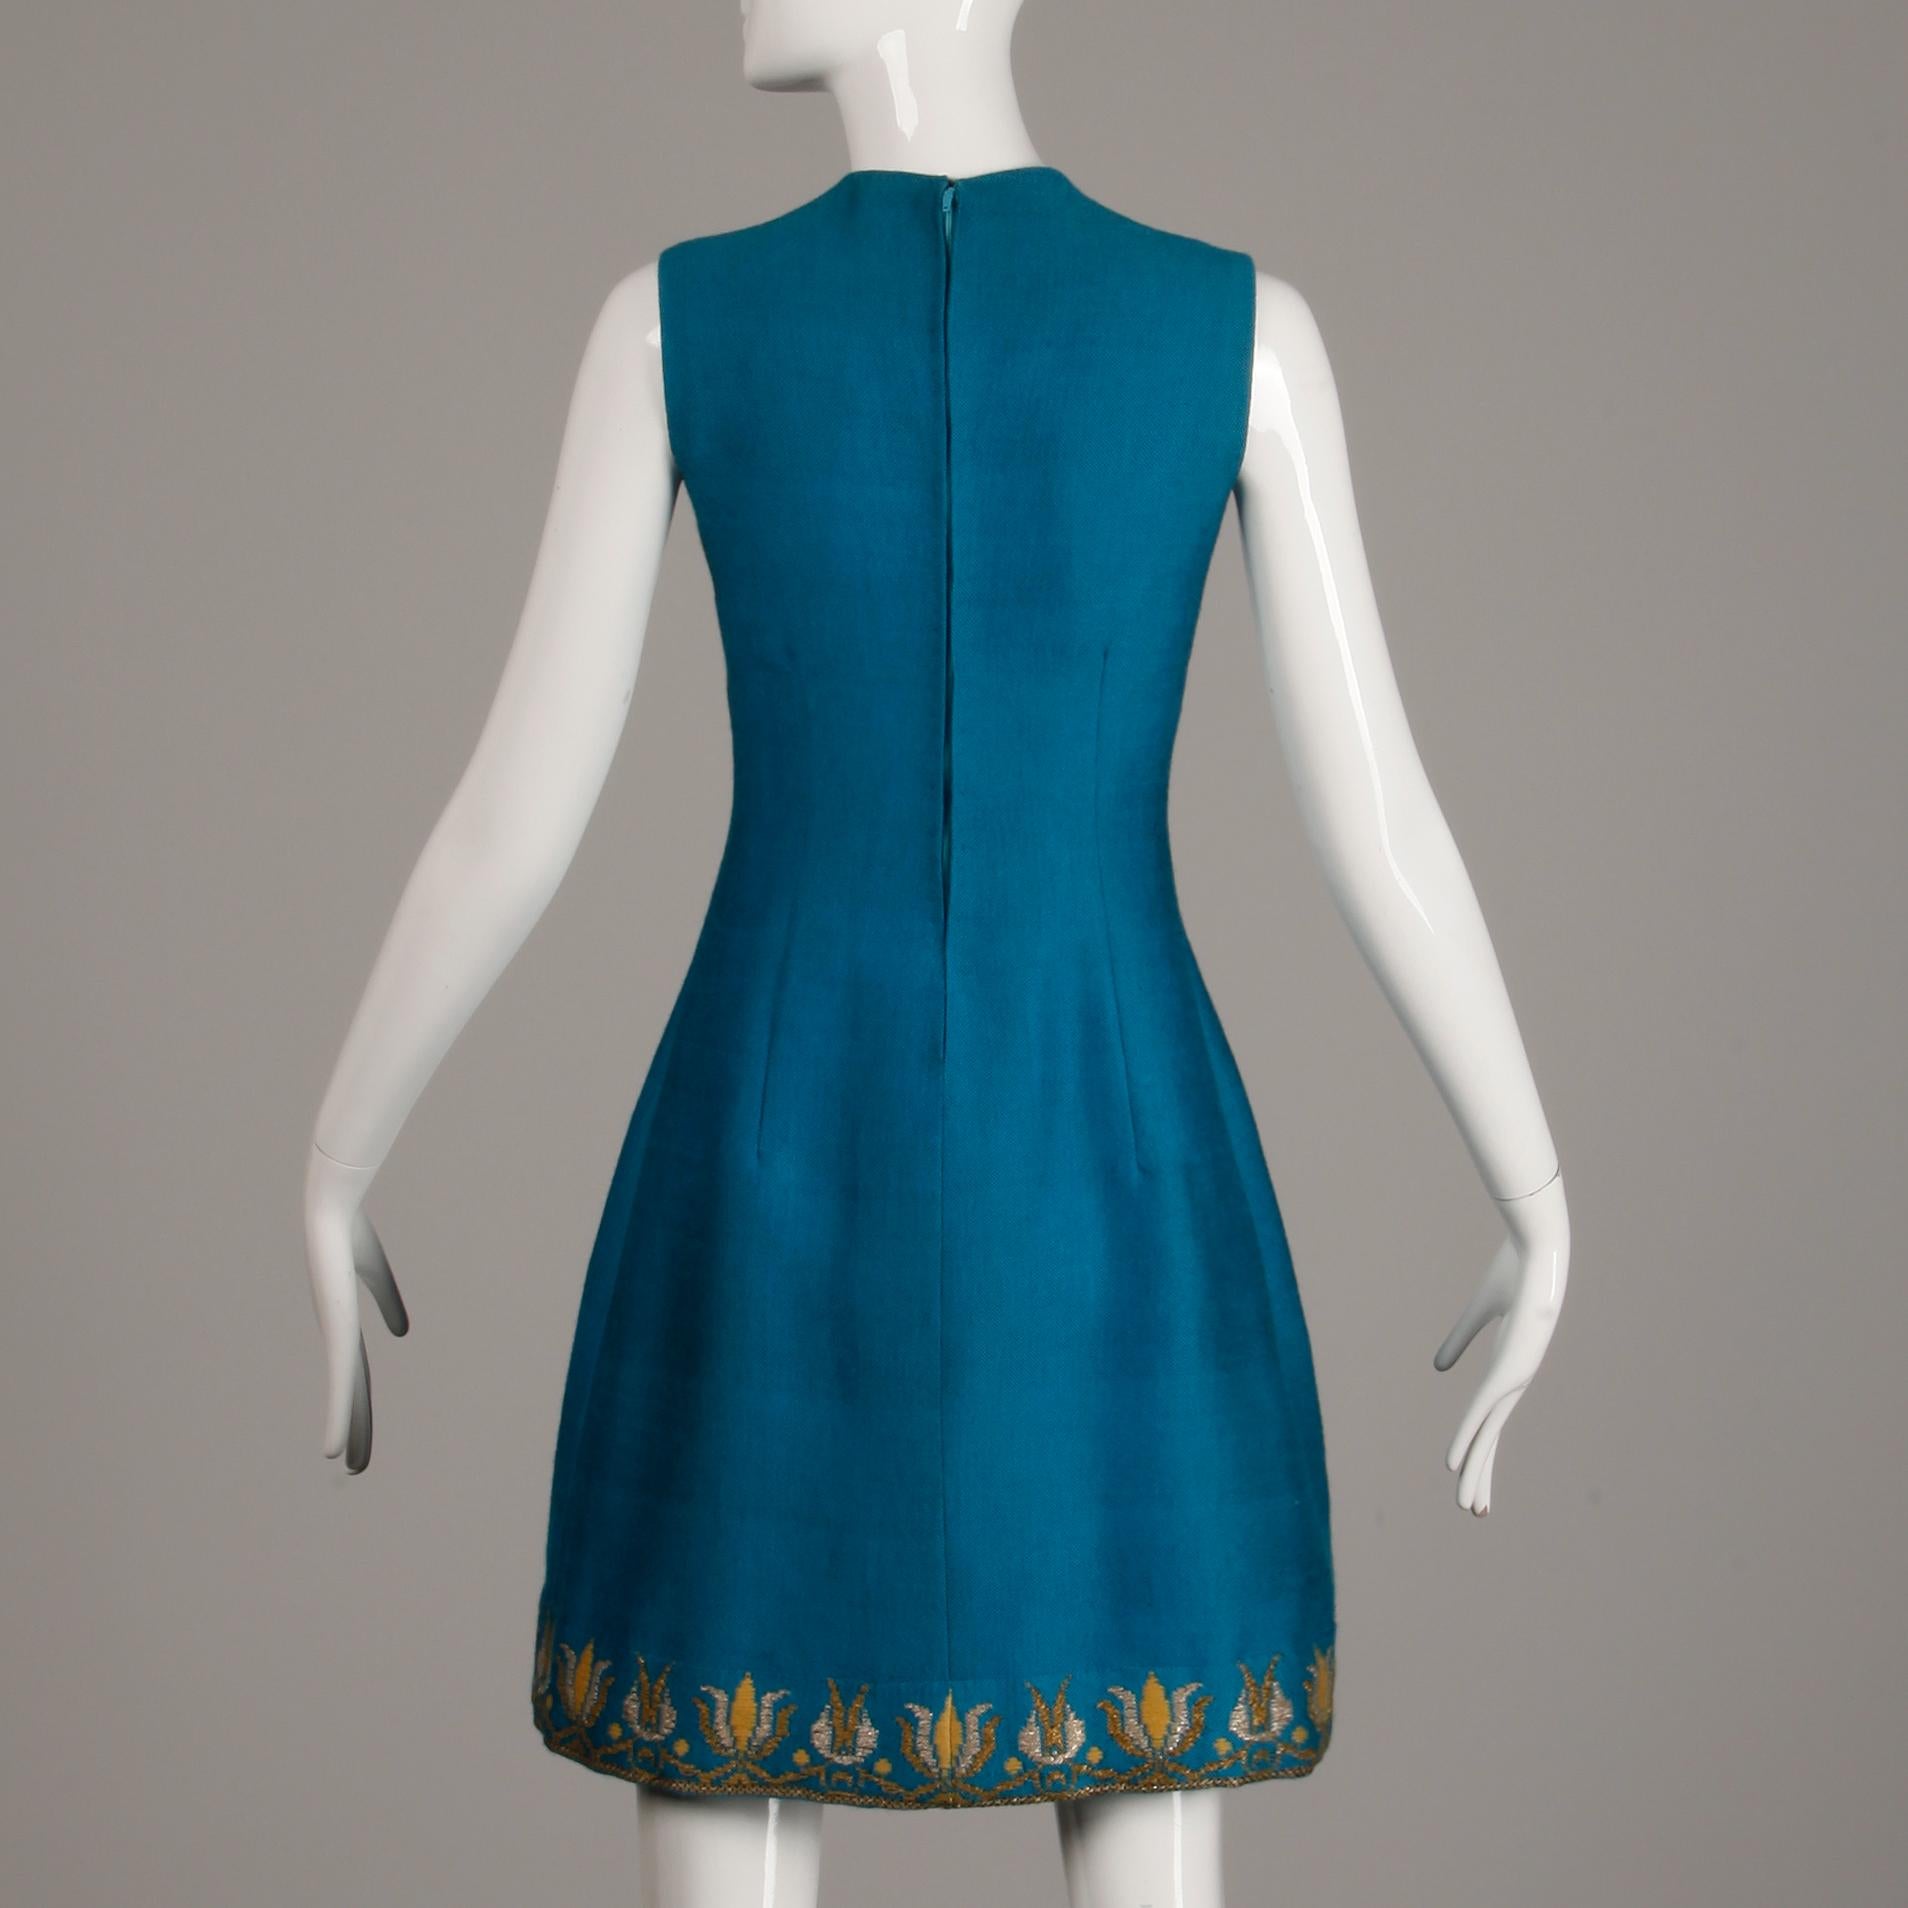 Rare 1960s Nikos-Takis Vintage Blue Shift Dress with Hand Embroidered Tulips For Sale 3